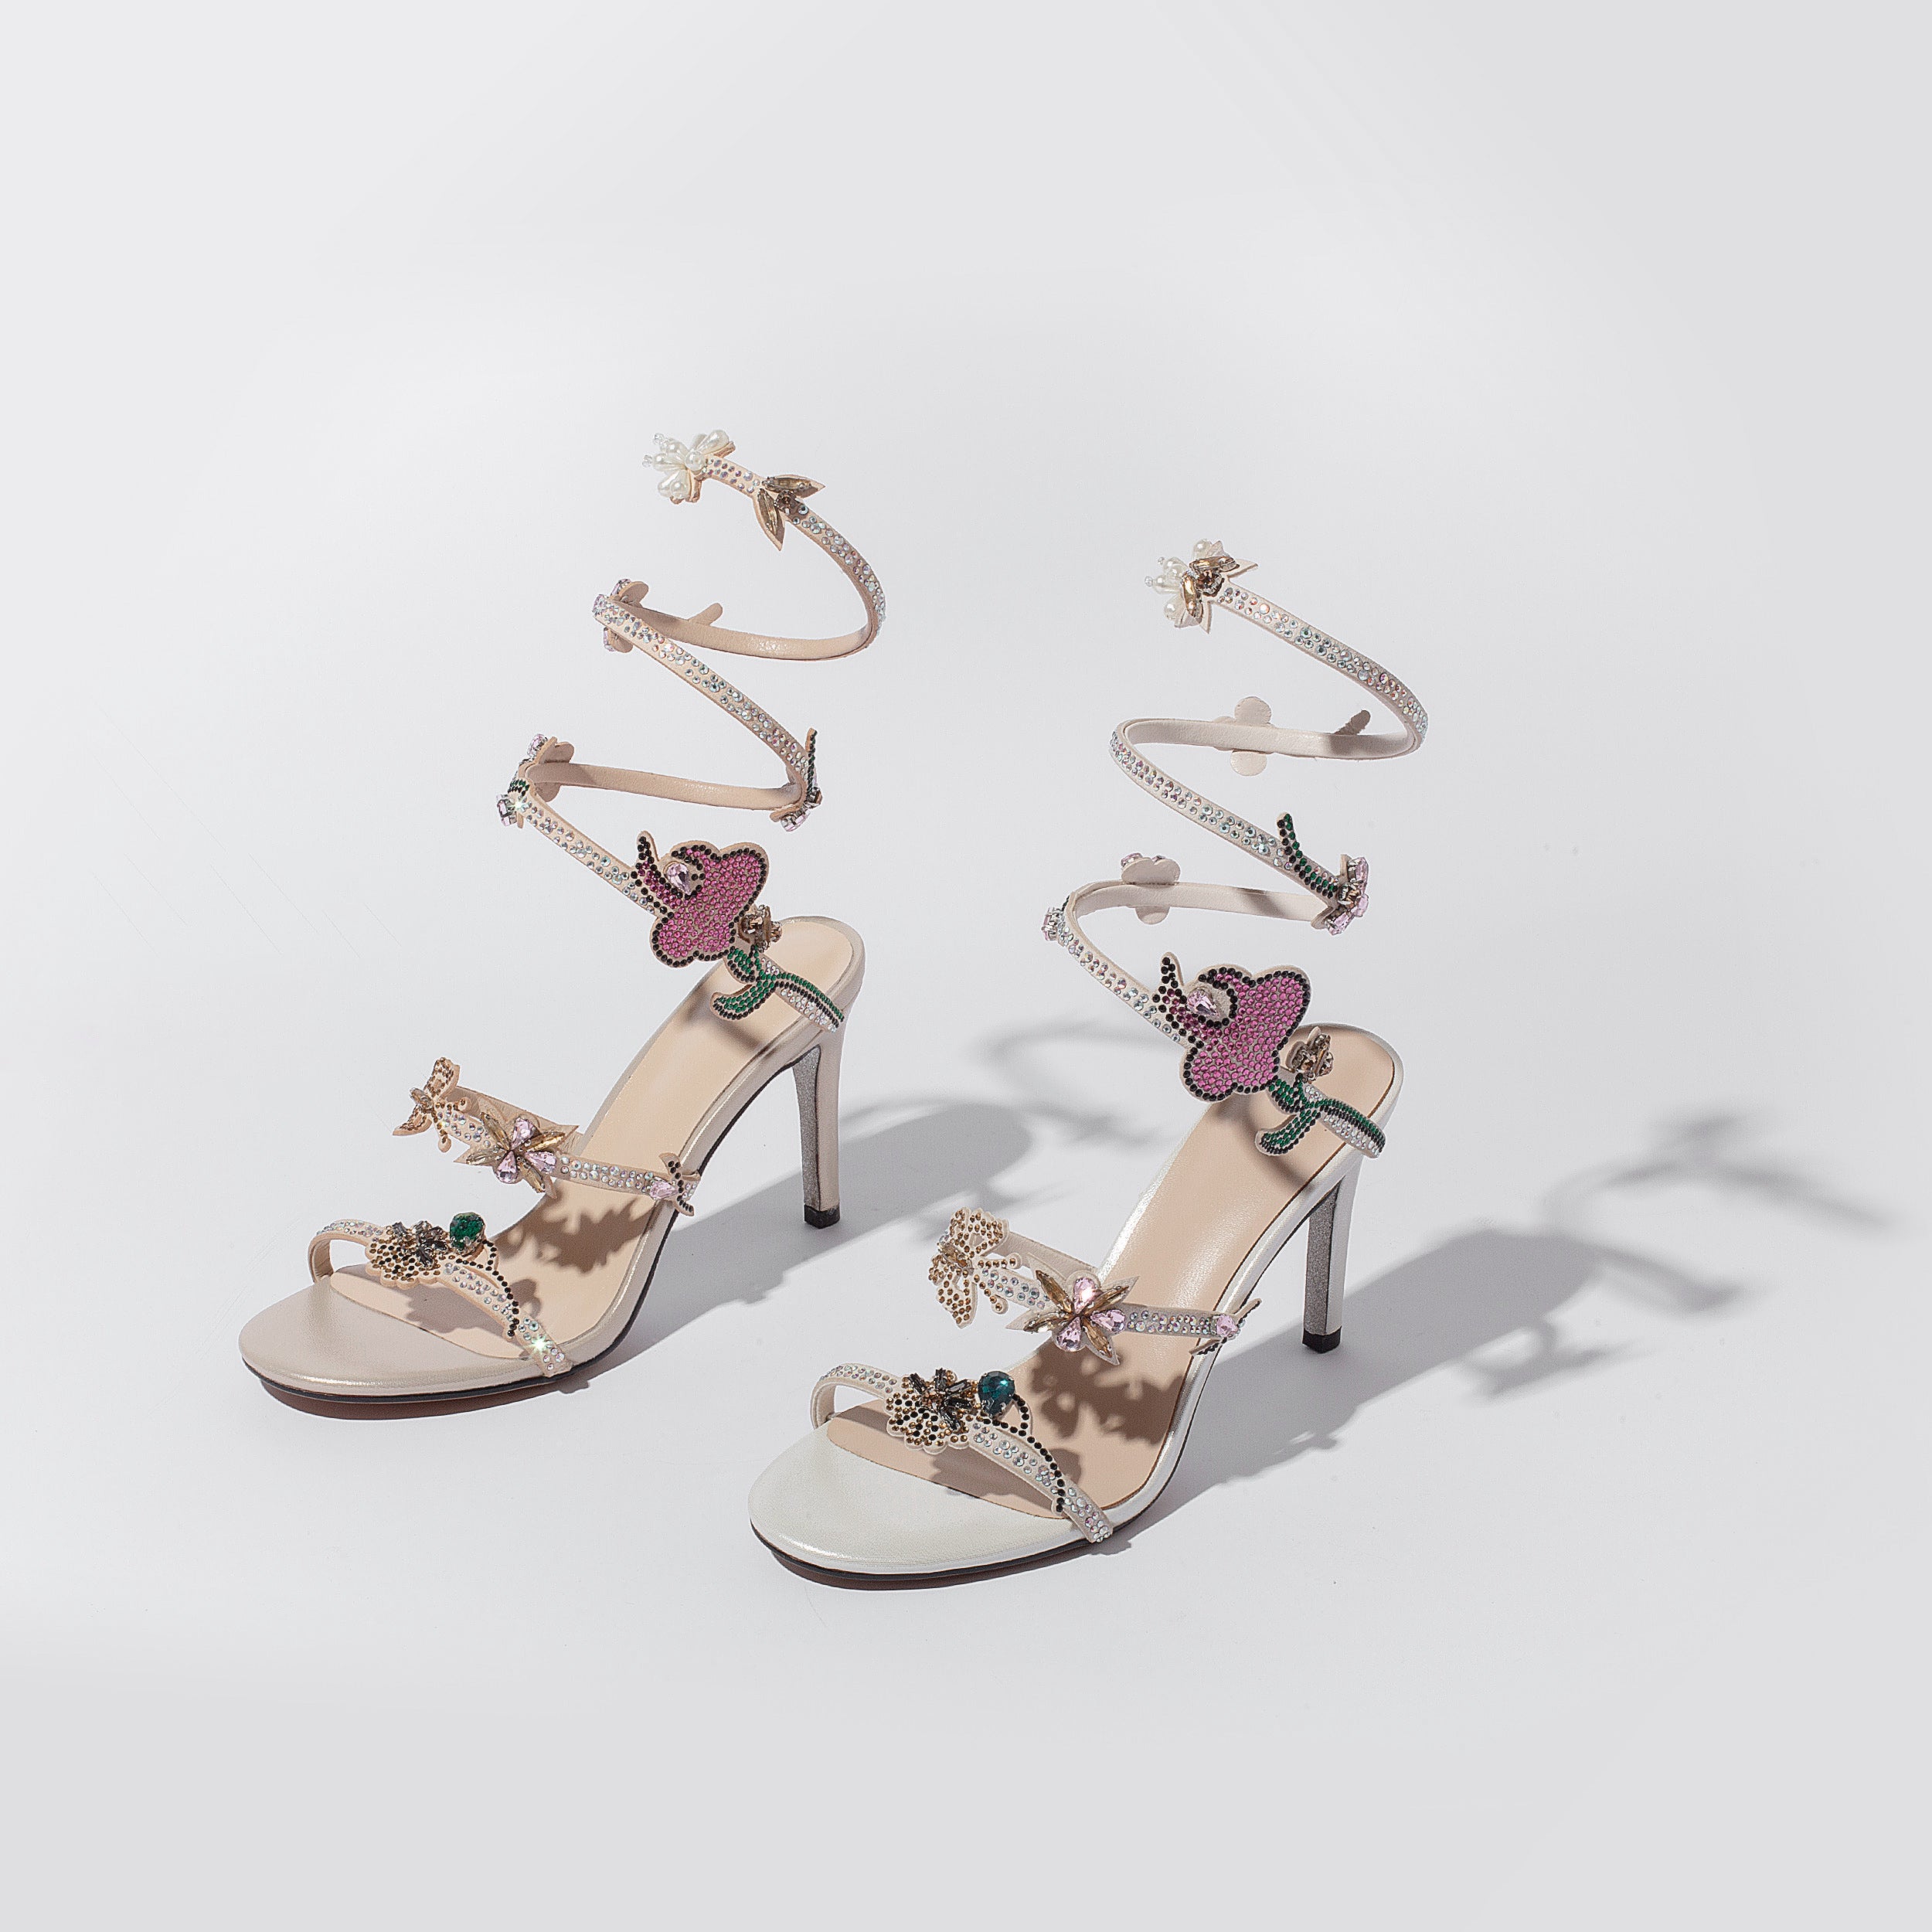 The Sweetest Lady Rose Ankle Heels